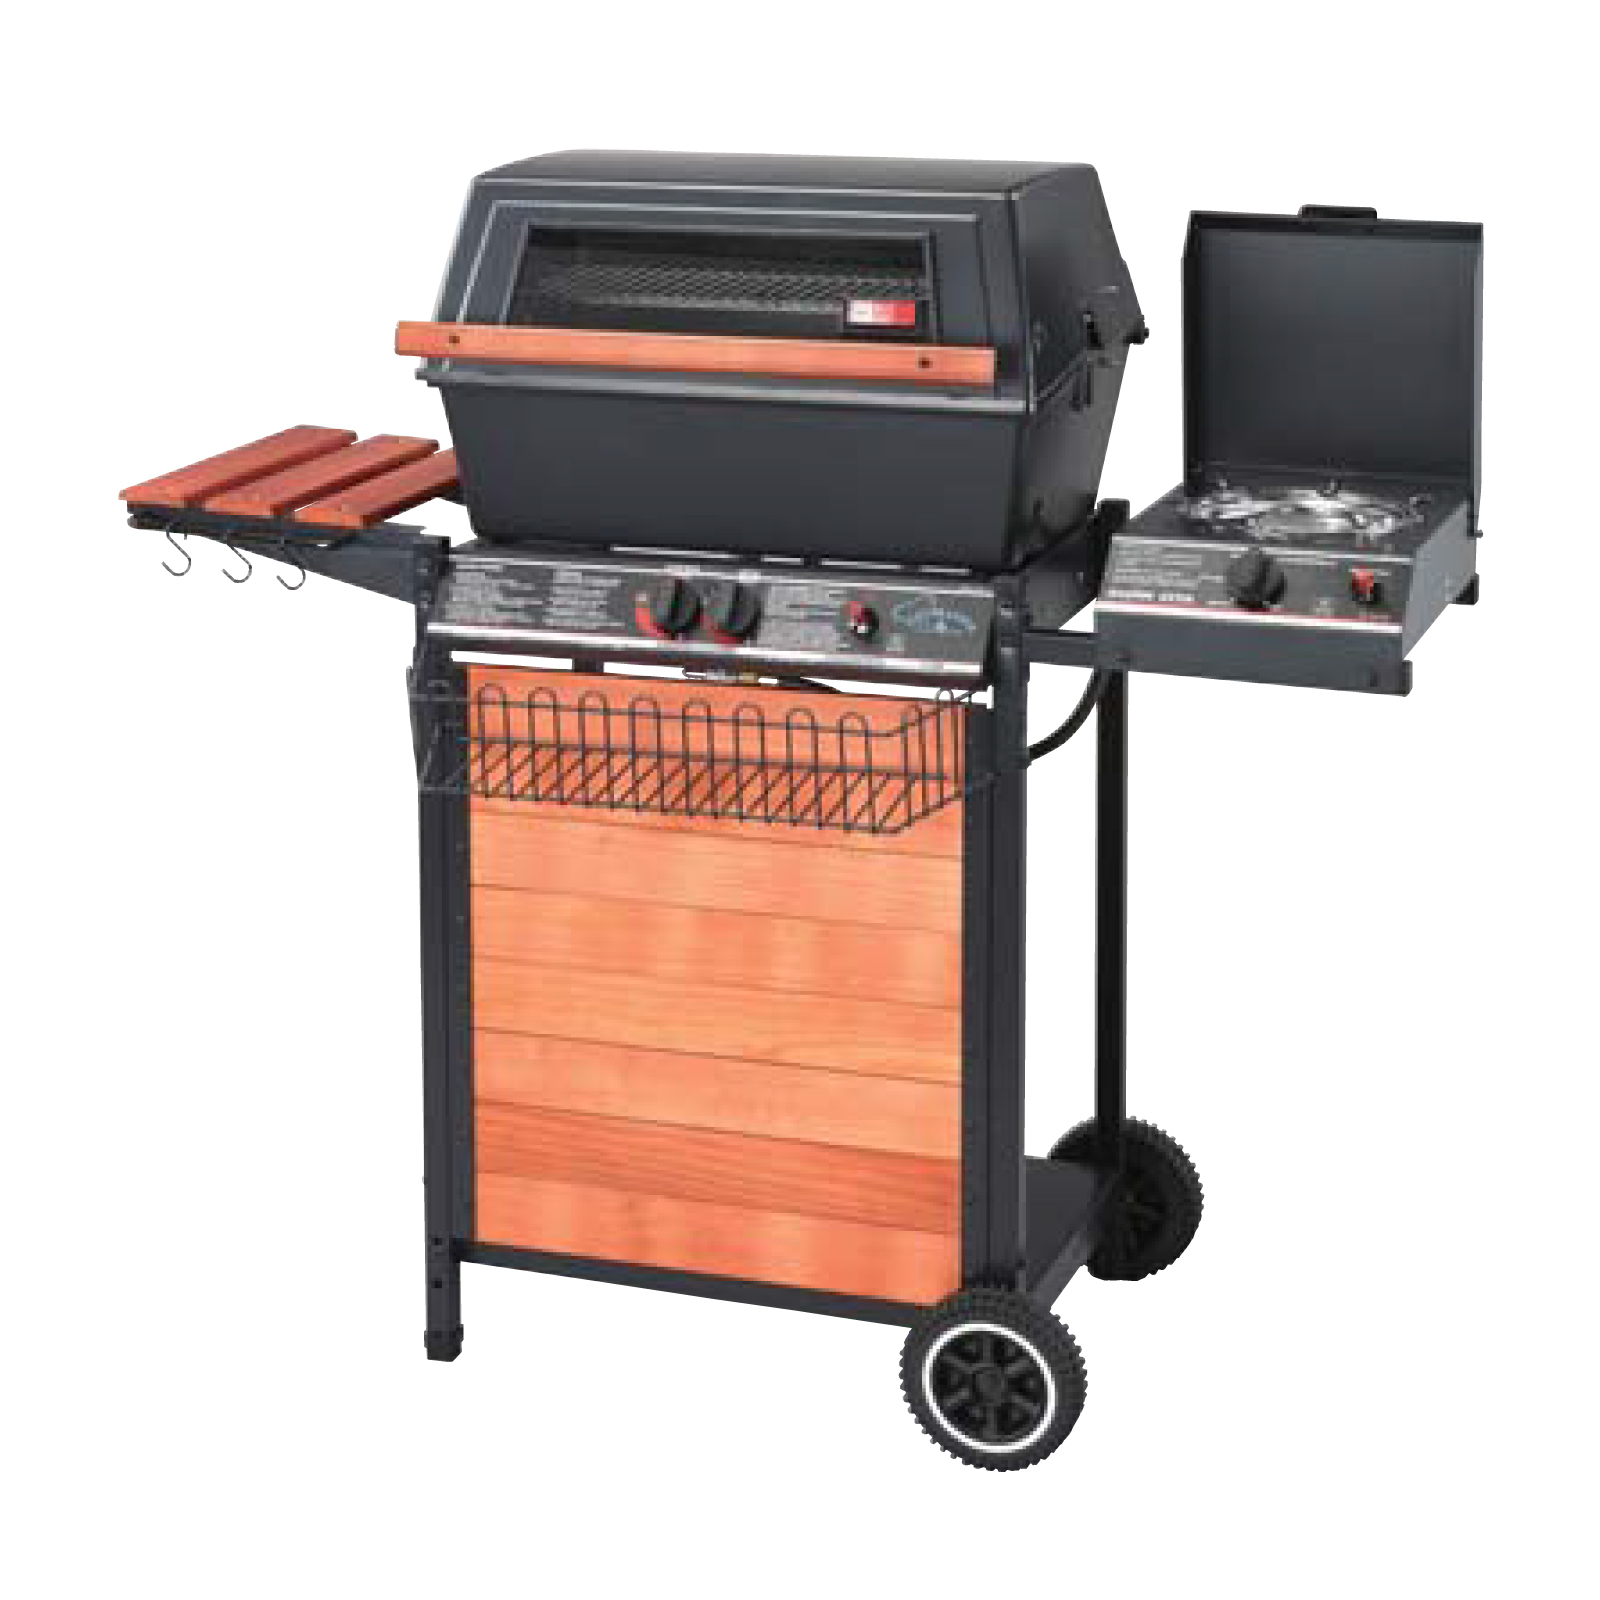 Luxury Aluminum Gas Grill With Side-Burner, 2808L